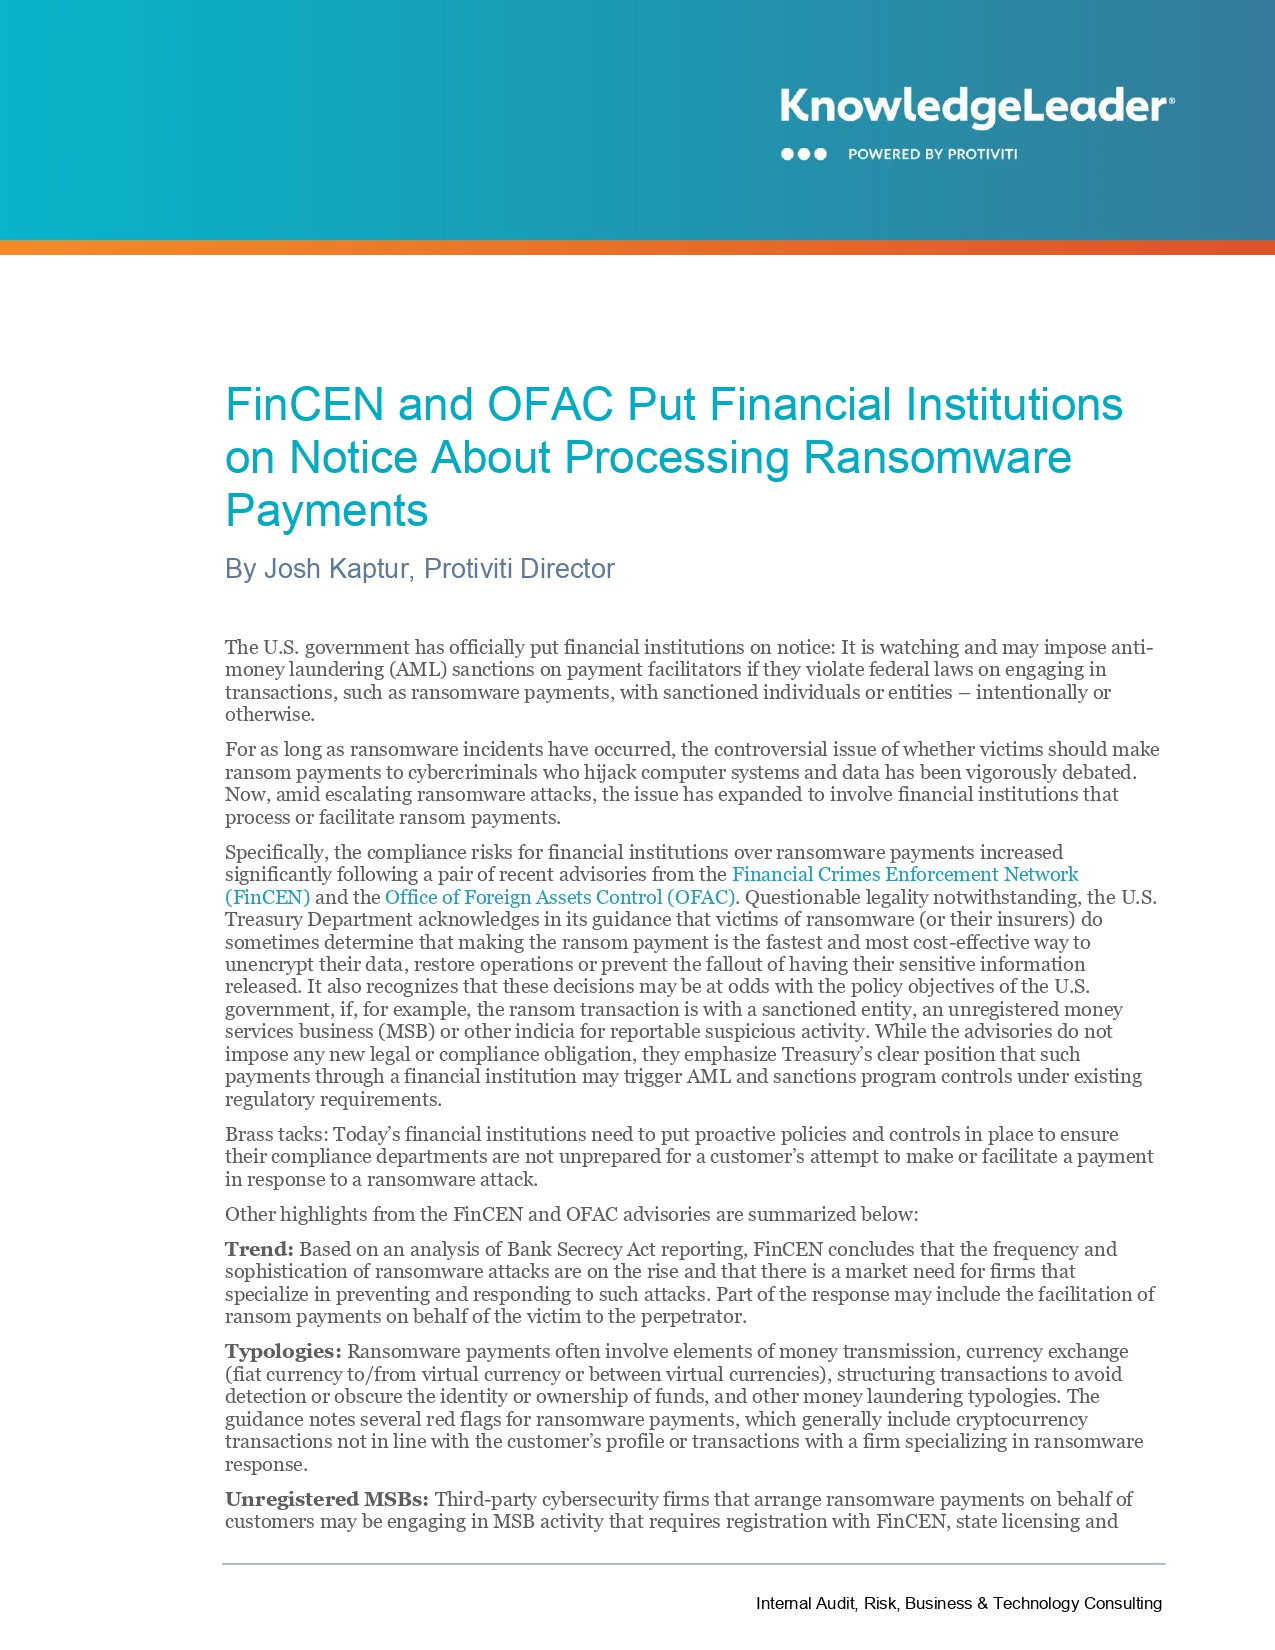 Screenshot of the first page of FinCEN and OFAC Put Financial Institutions on Notice About Processing Ransomware Payments